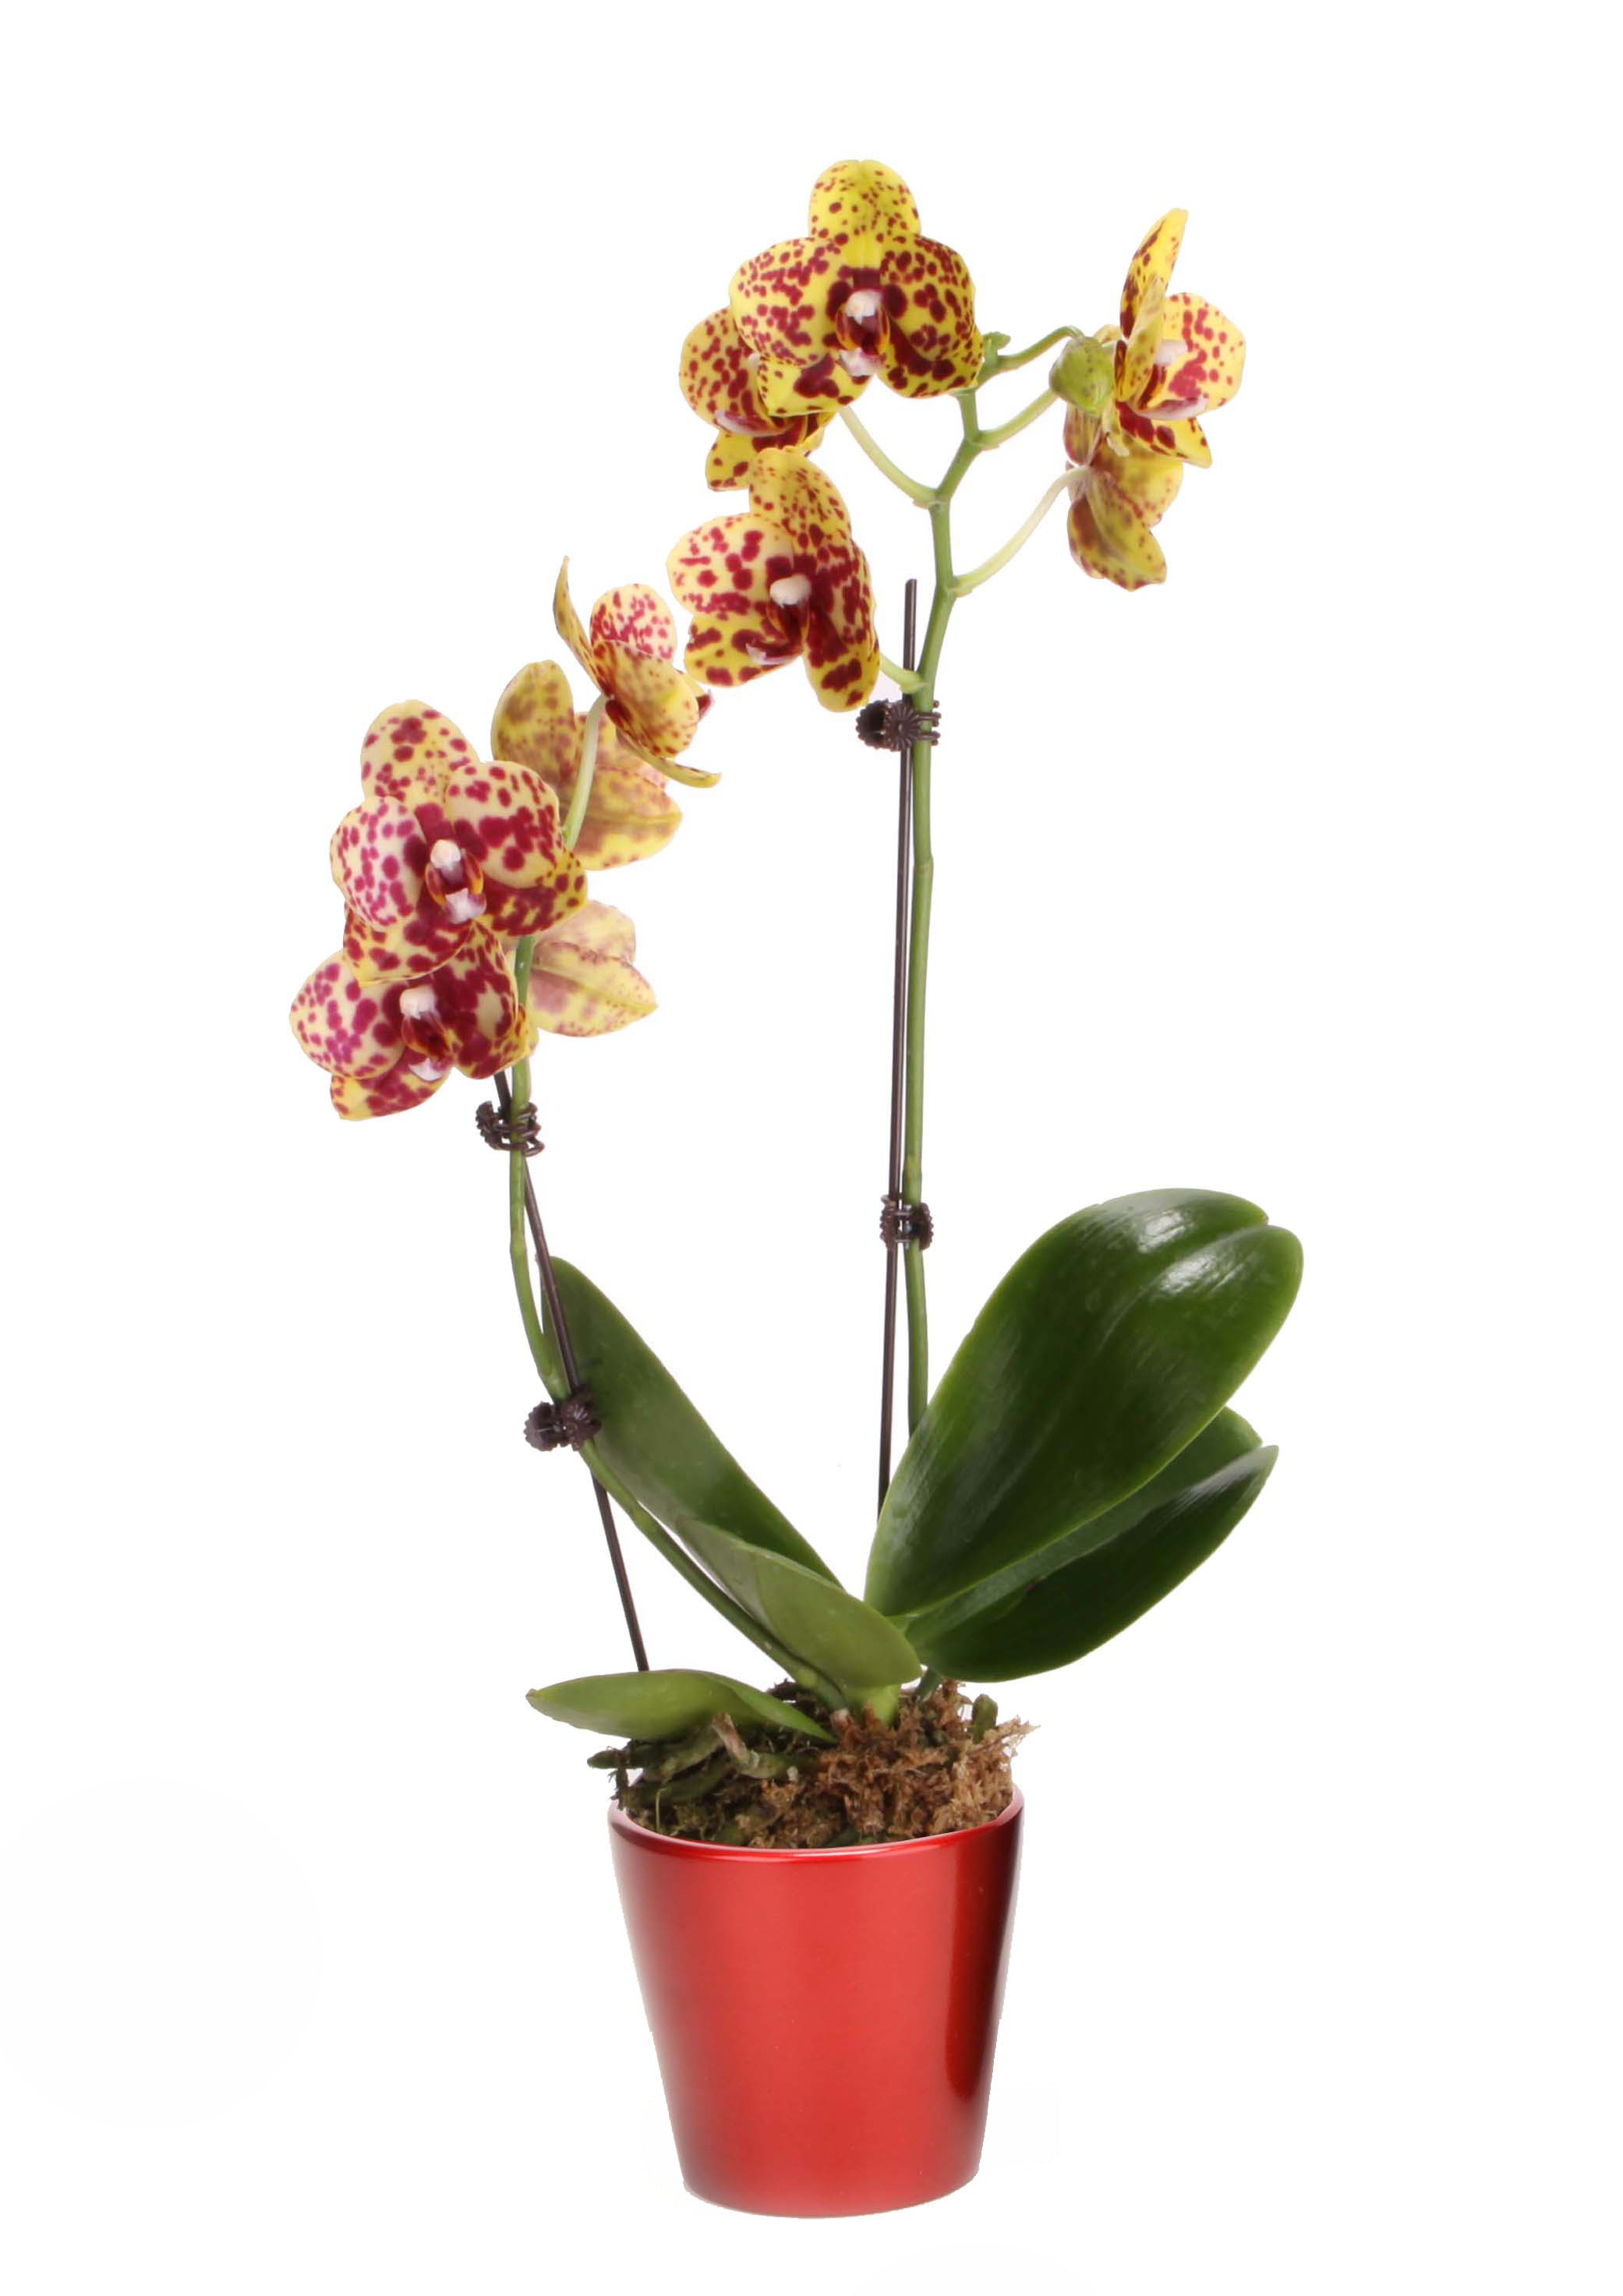 Costa Farm's orchids make a great gift for the holiday party host!